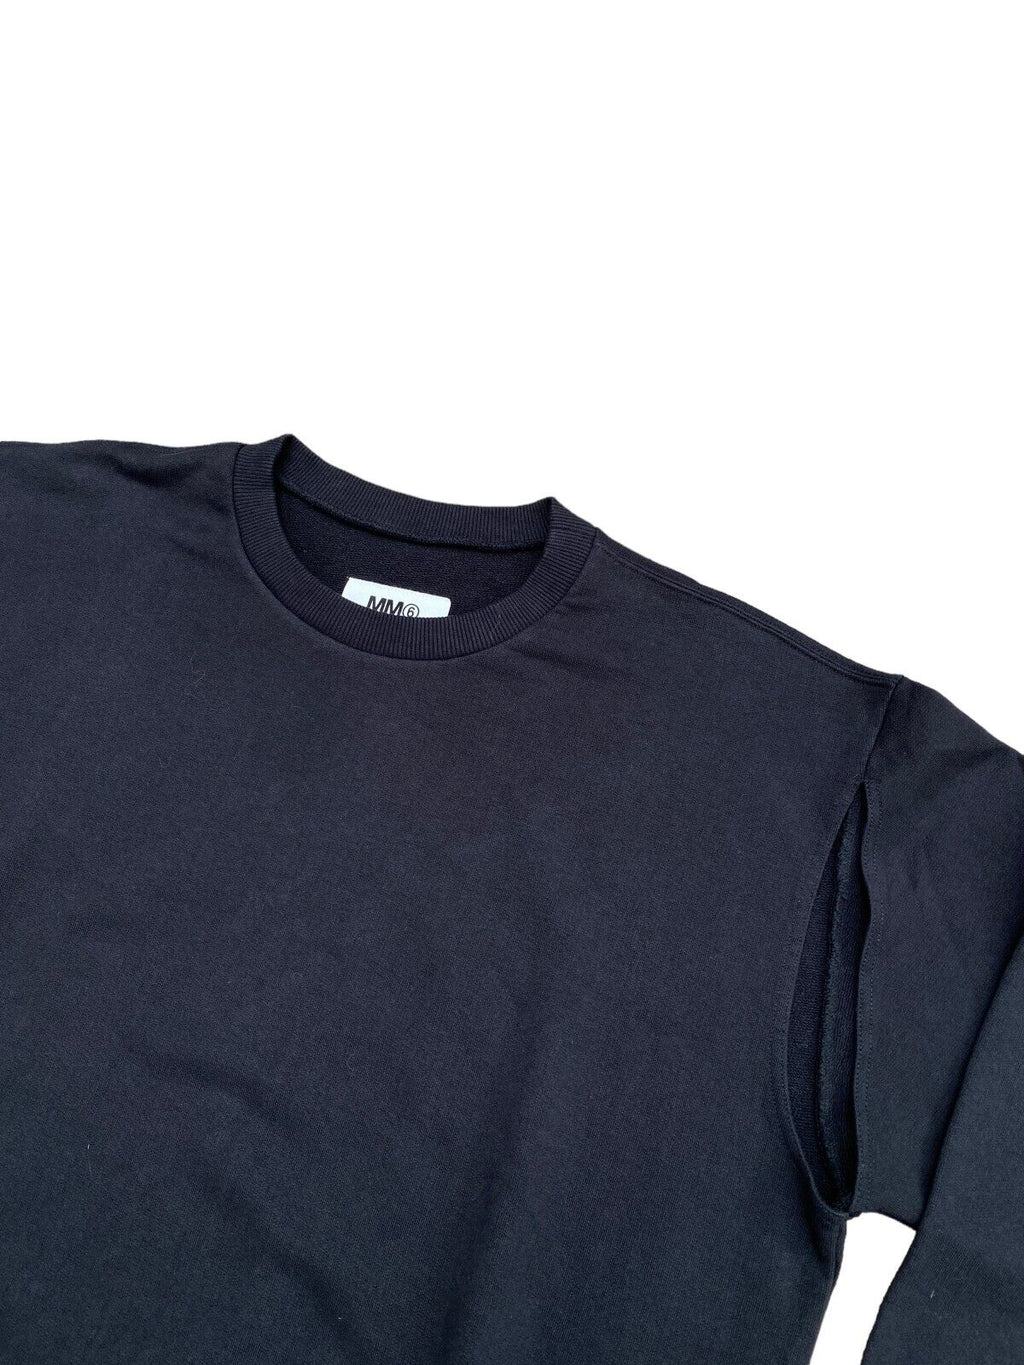 Oversized Black Sweatshirt Open on the shoulders Size S up to L